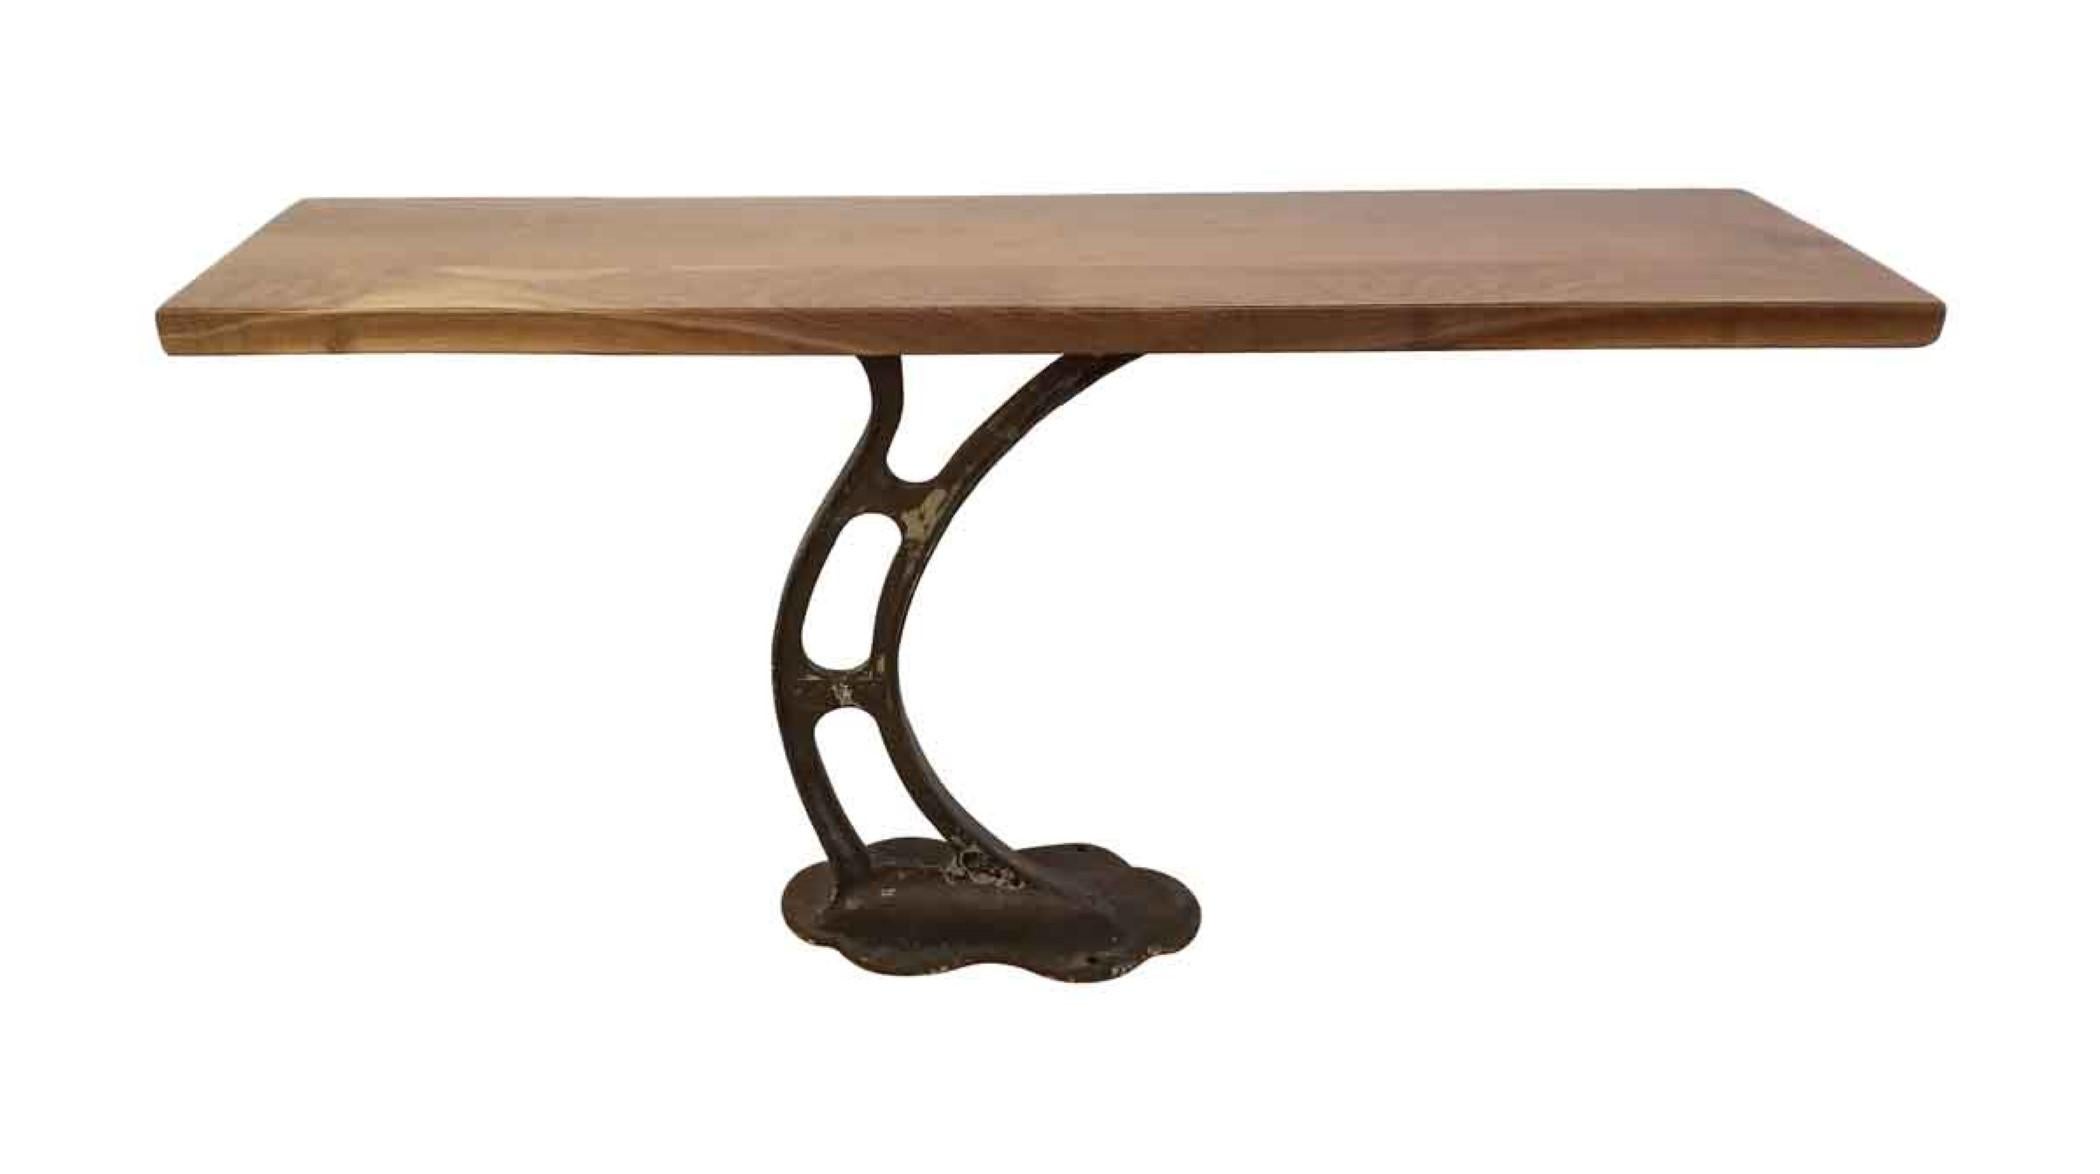 1920s industrial era cast iron base with a new solid black walnut top. Can be used as a console or side table.